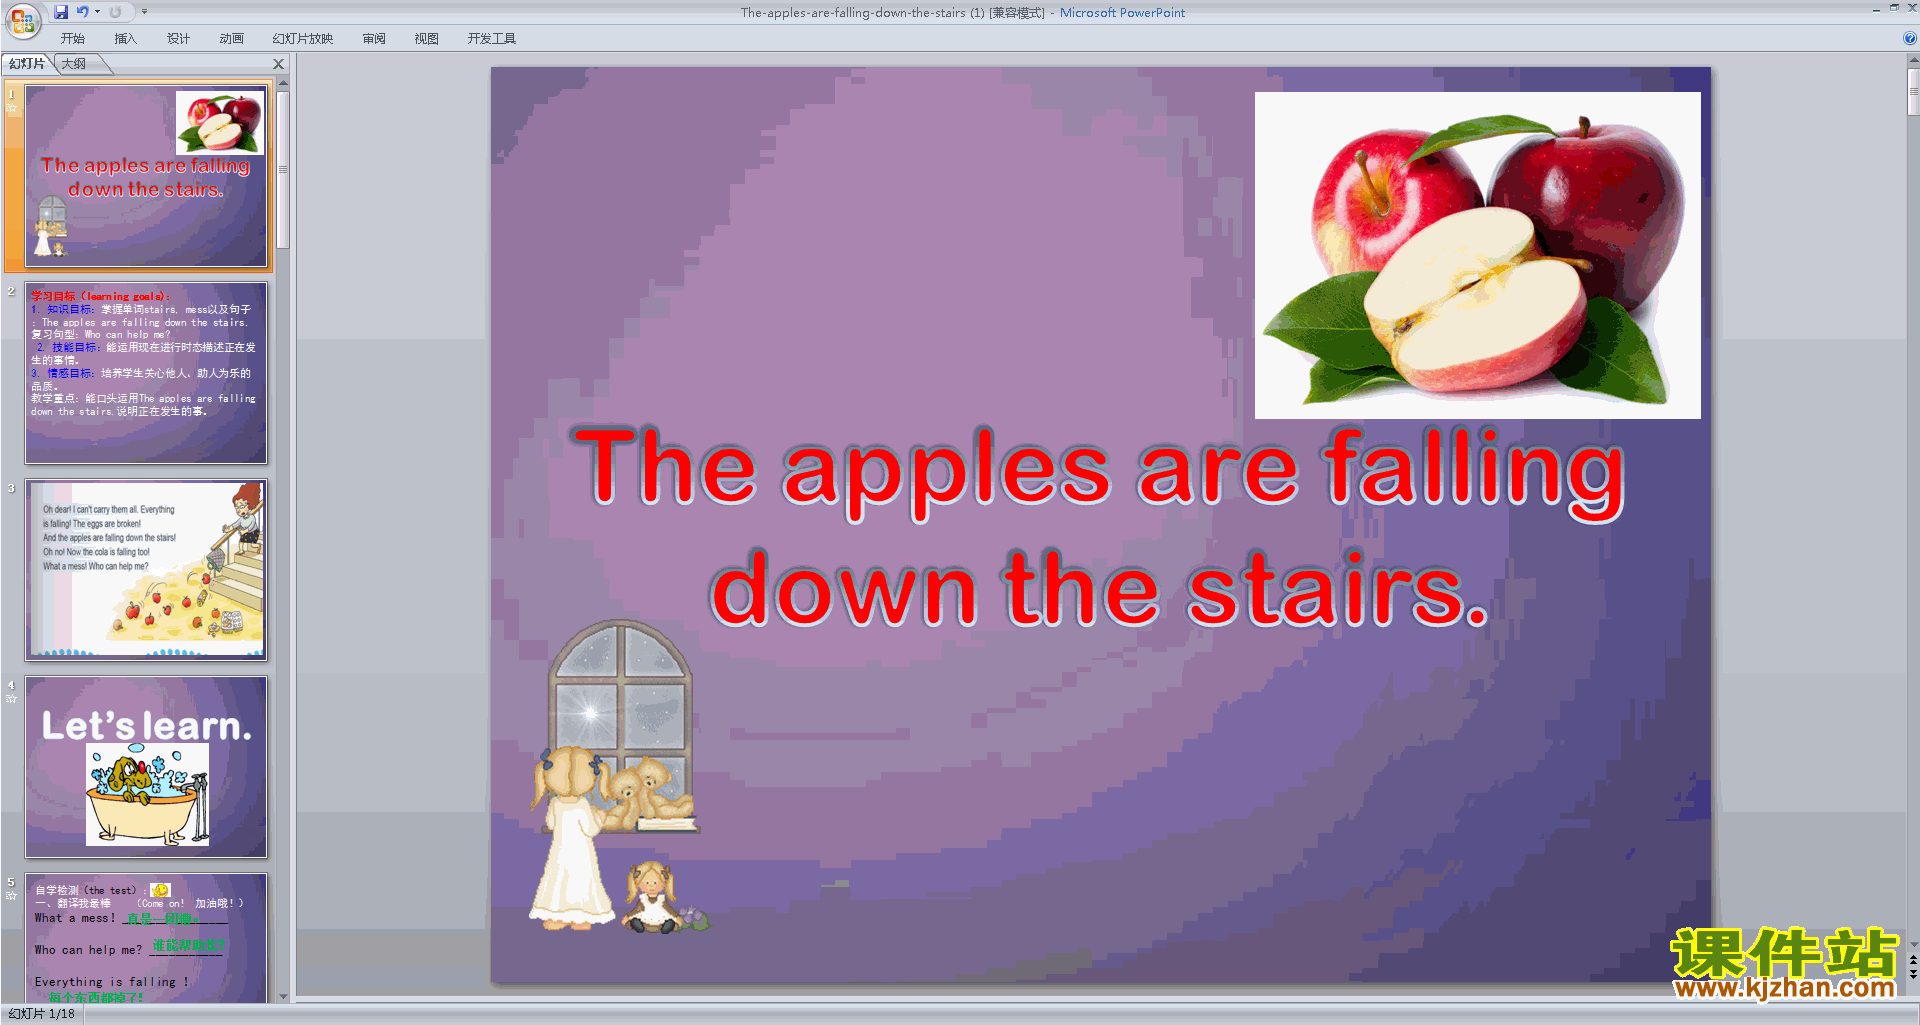 The apples are falling down the stairs μppt